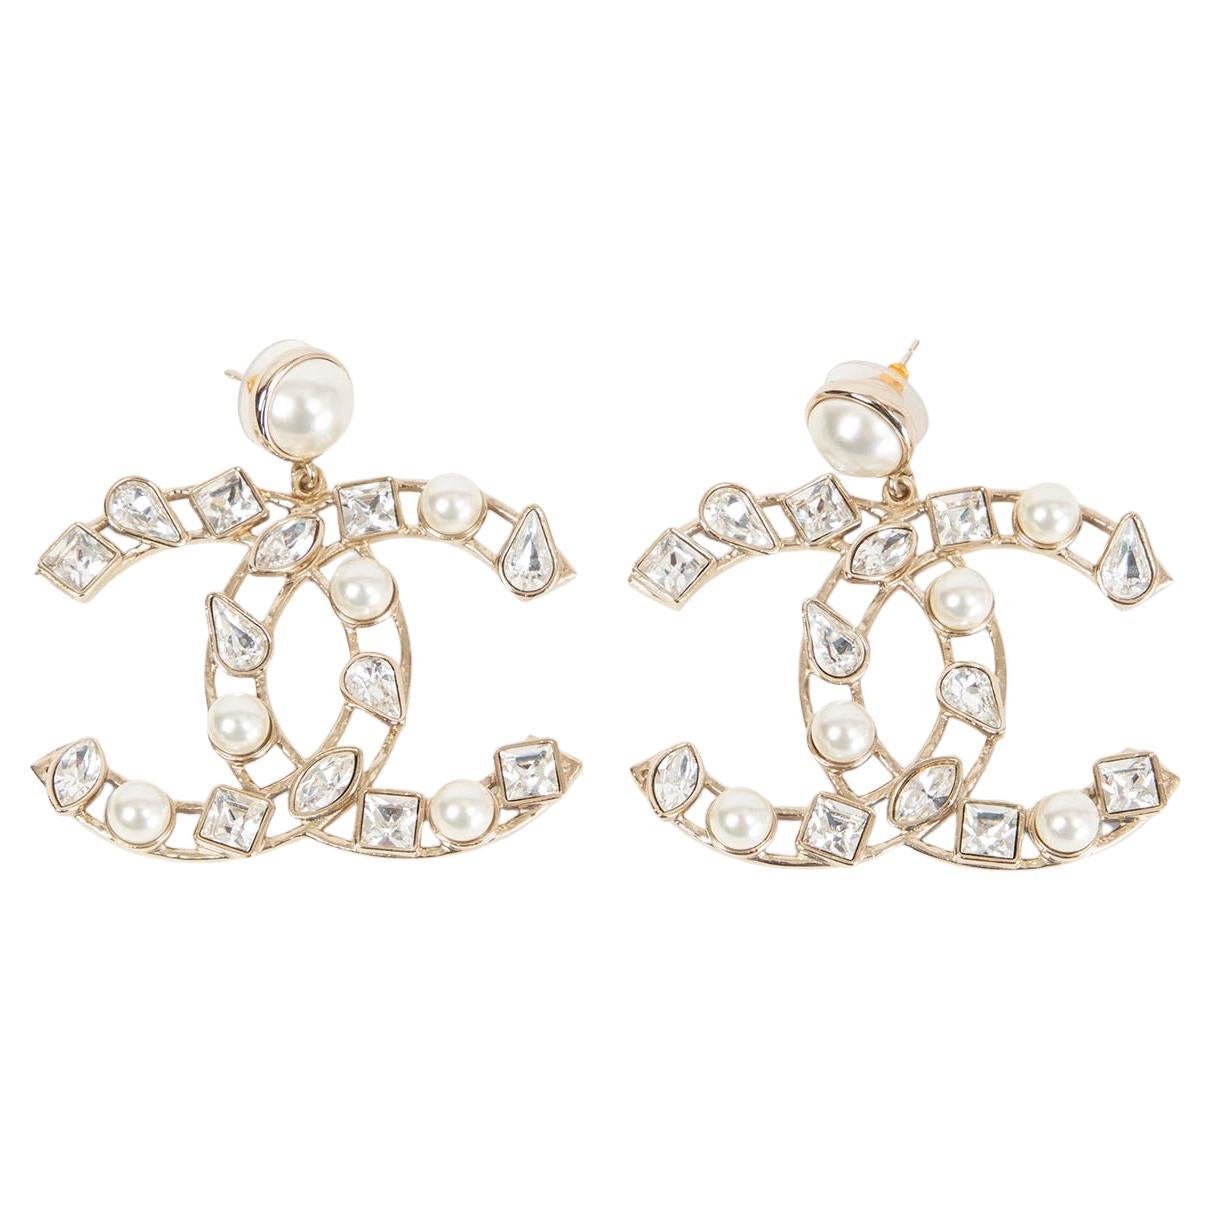 CHANEL clear 2019 CRYSTAL and PEARL OVERSIZED CC Earrings at 1stDibs  chanel  earrings, chanel baguette earrings, chanel crystal timeless cc earrings